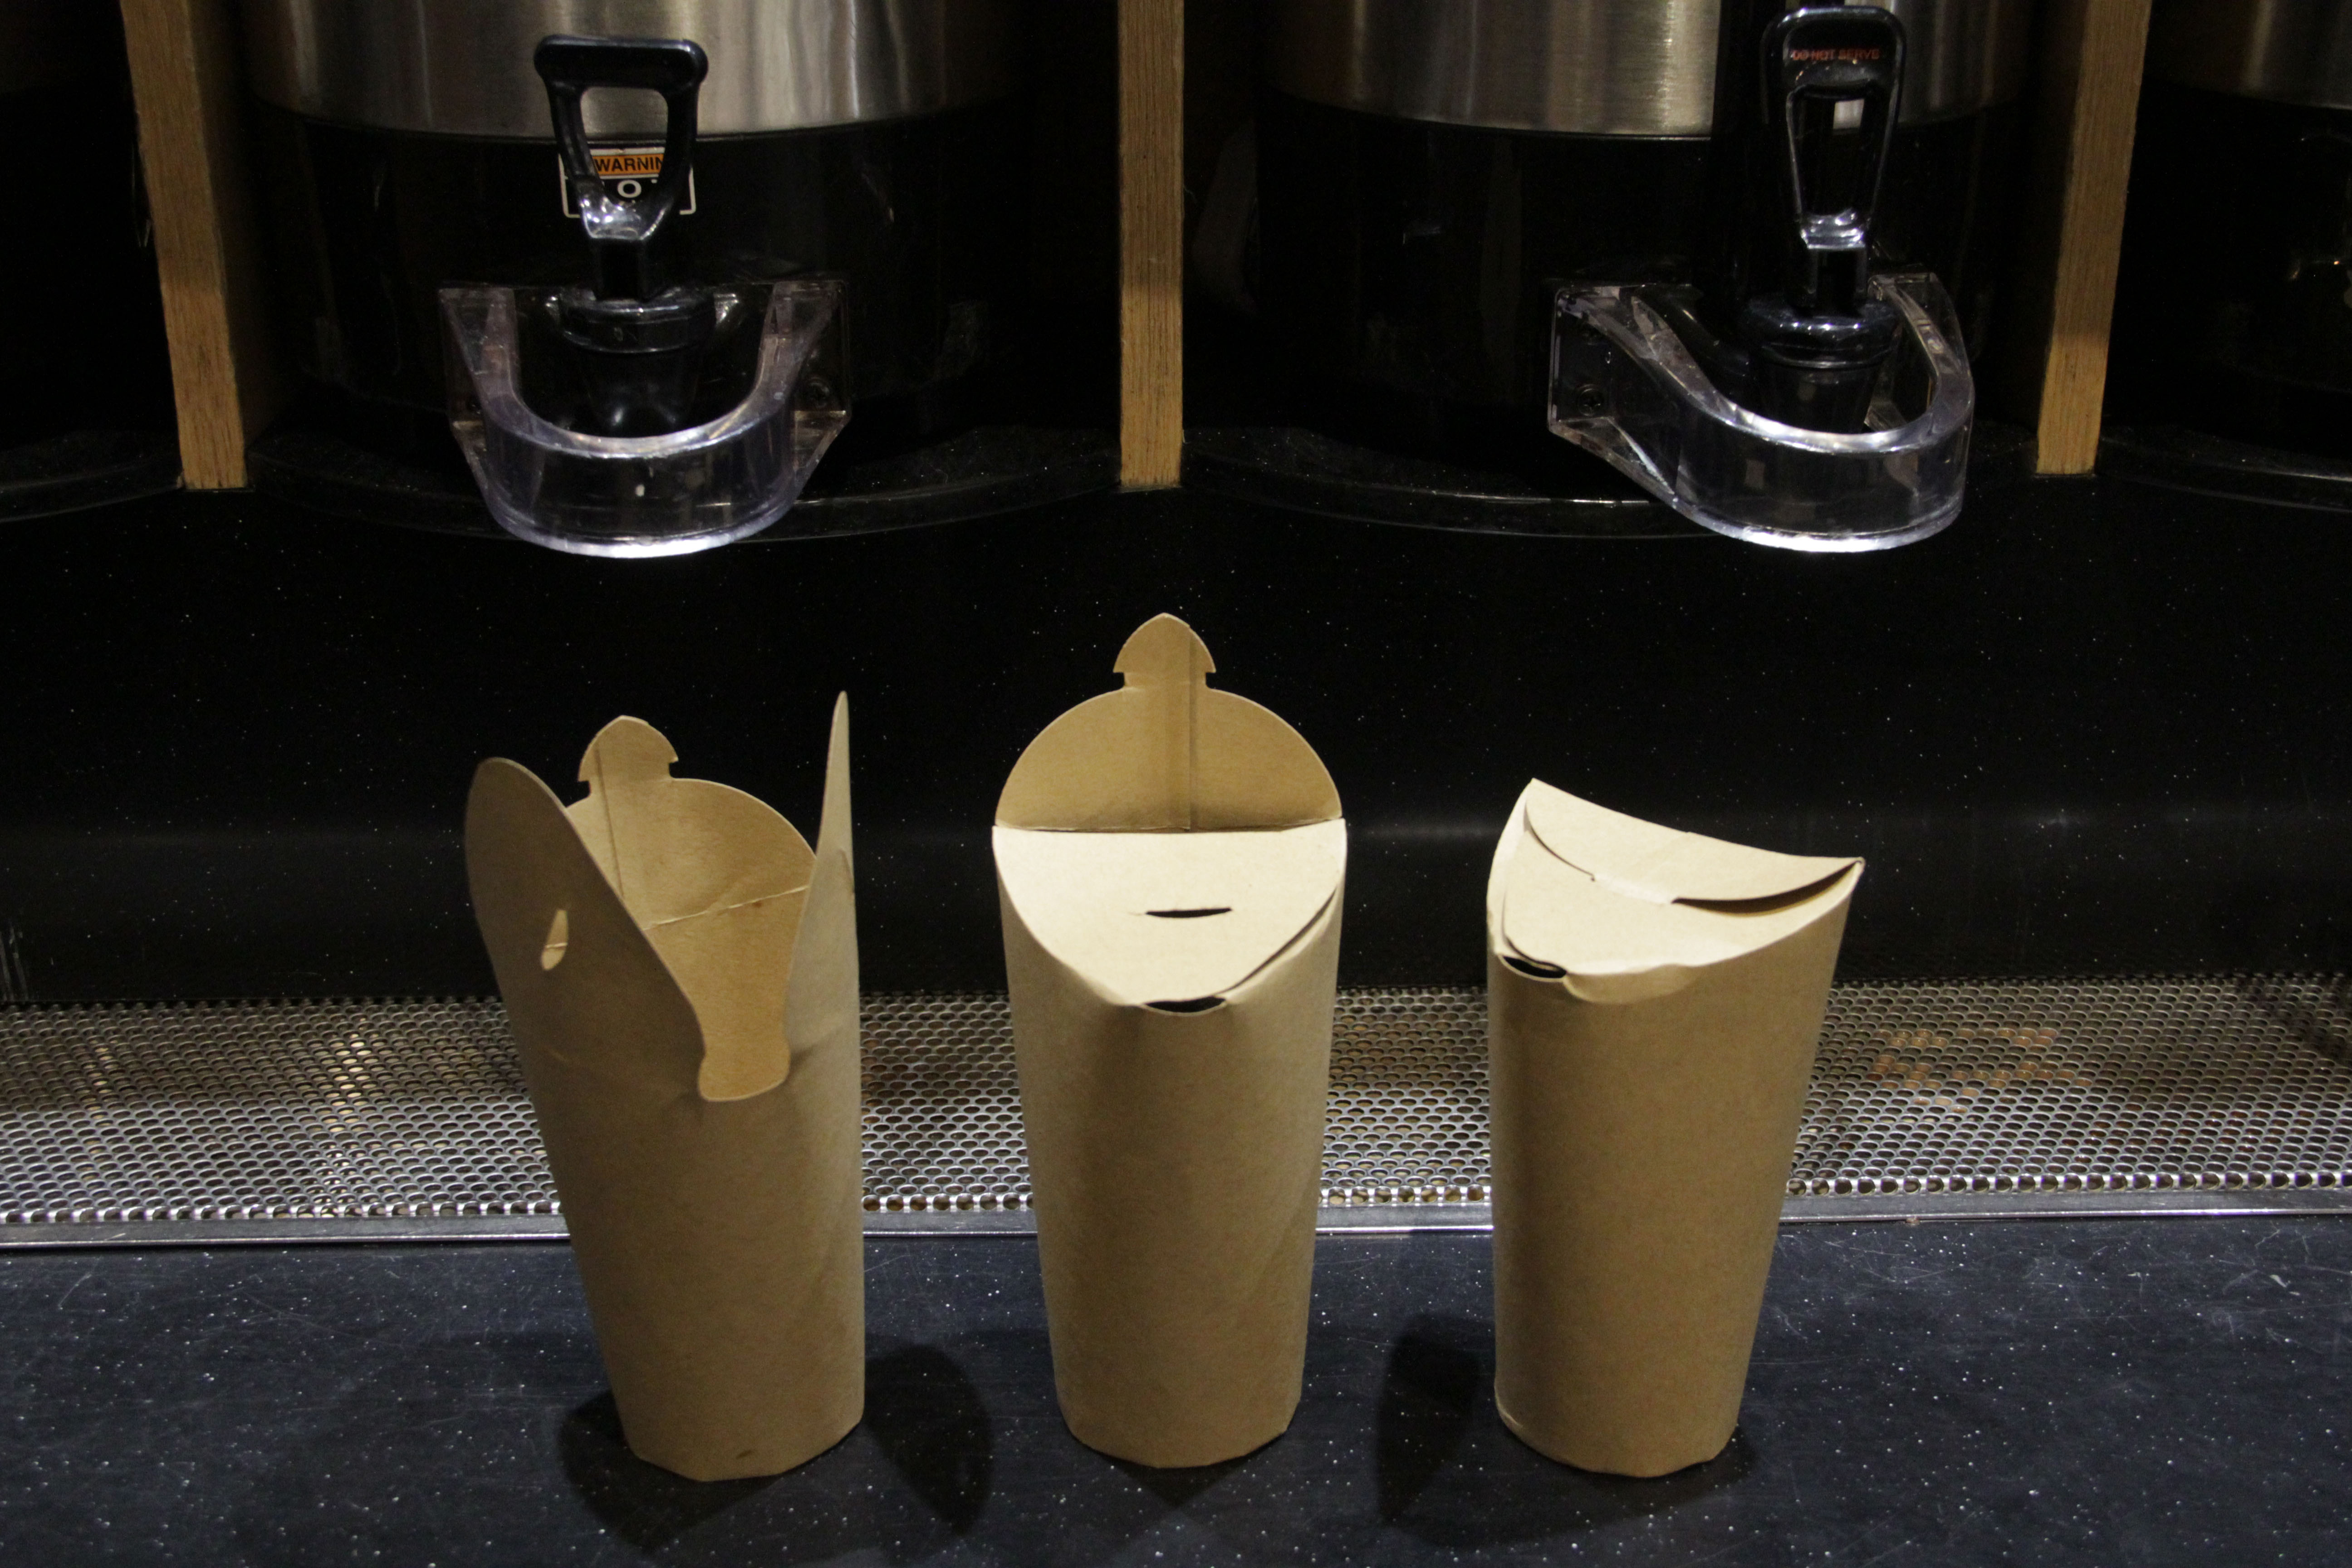 Three TrioCup coffee cups